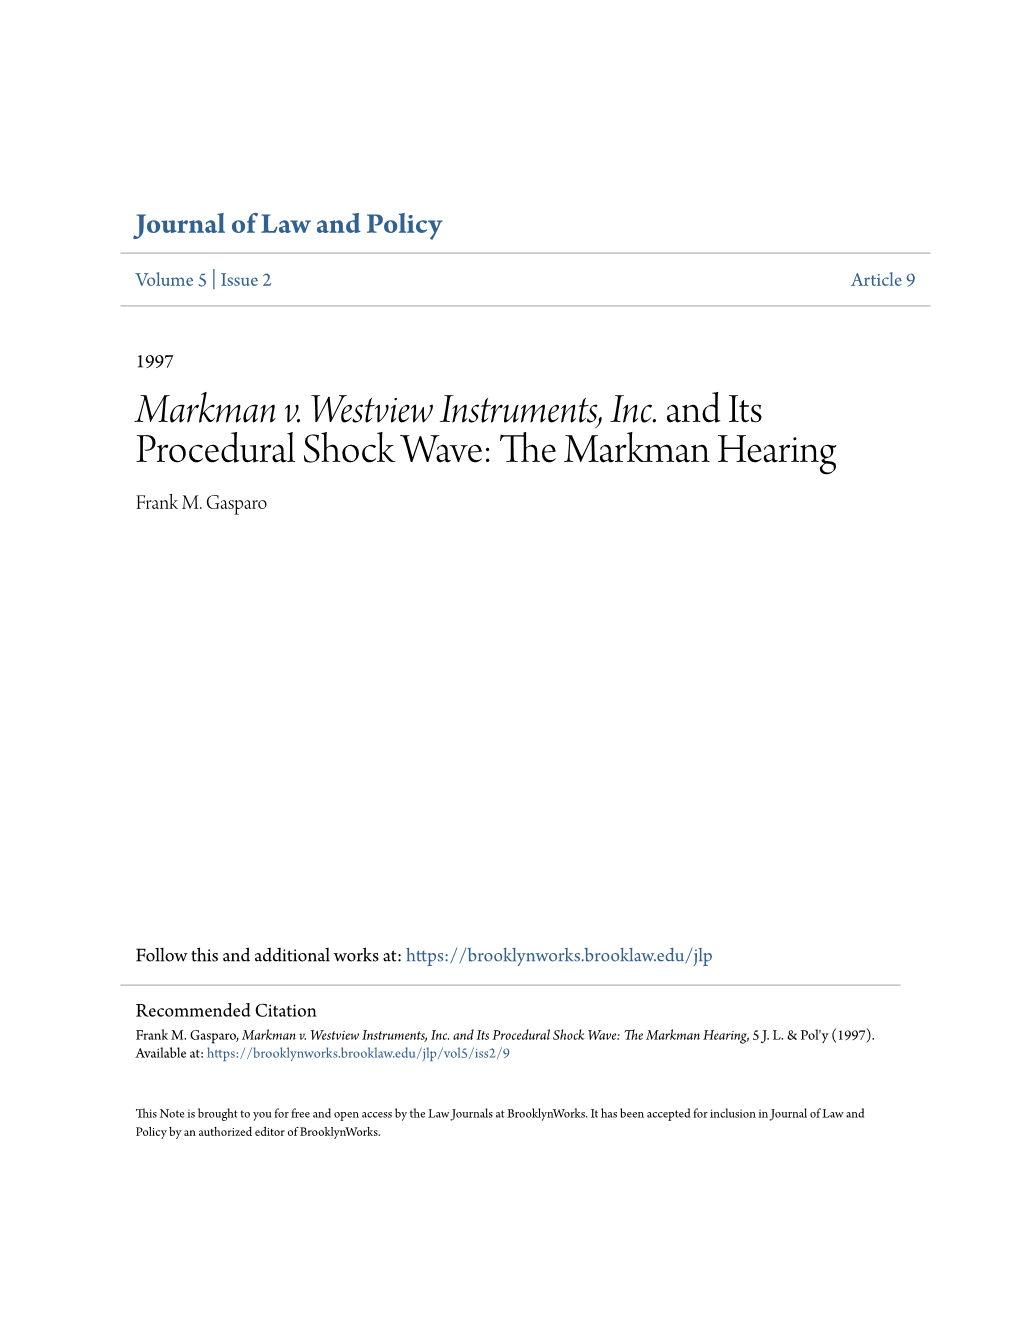 Markman V. Westview Instruments, Inc. and Its Procedural Shock Wave: the Am Rkman Hearing Frank M